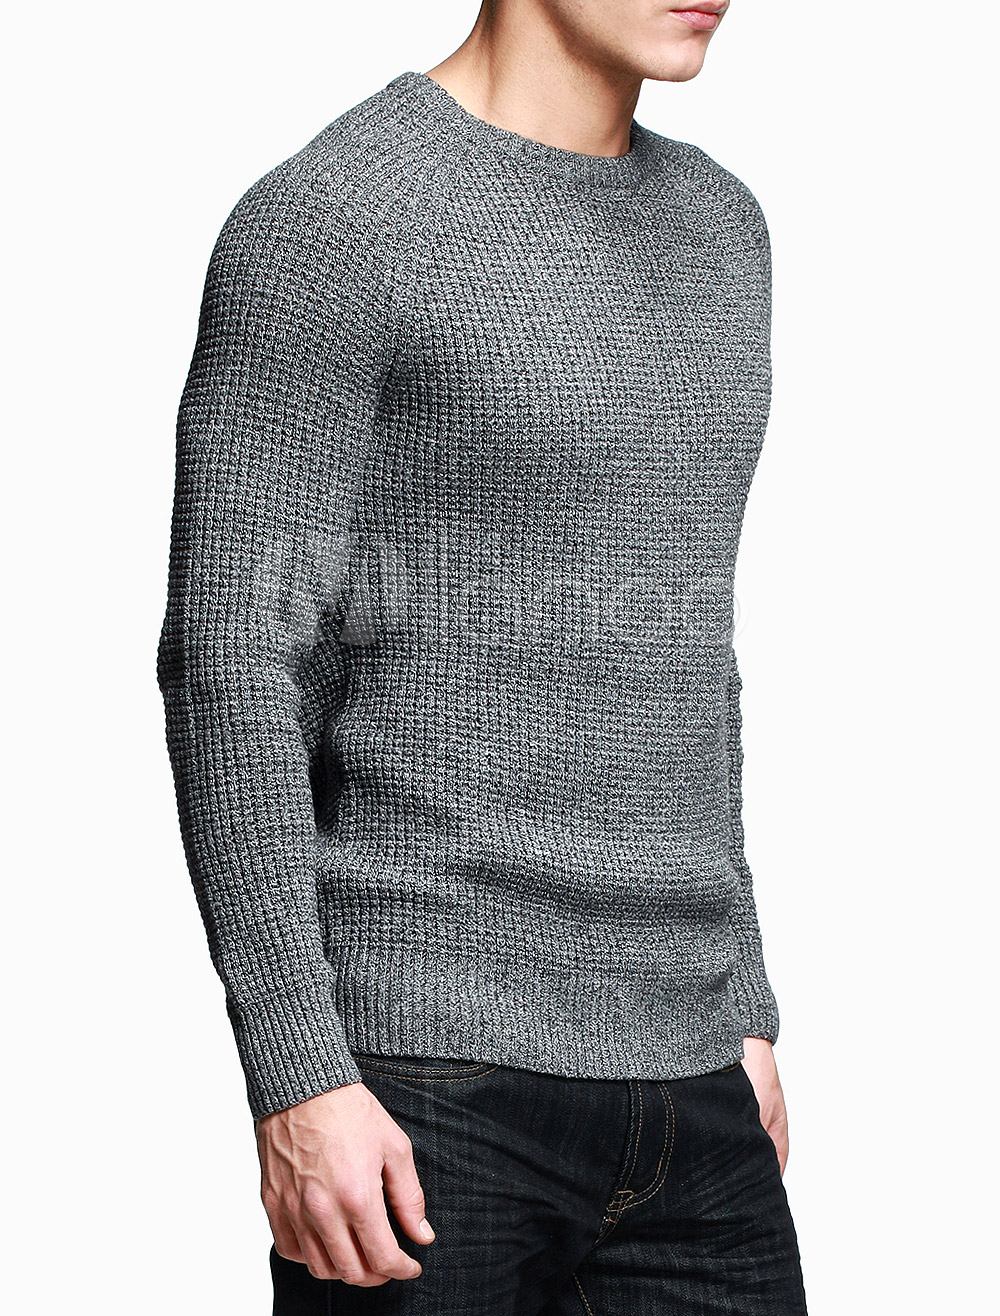 Gray Crewneck Knitted Cotton Casual Pullover Knitwear For Men - Milanoo.com